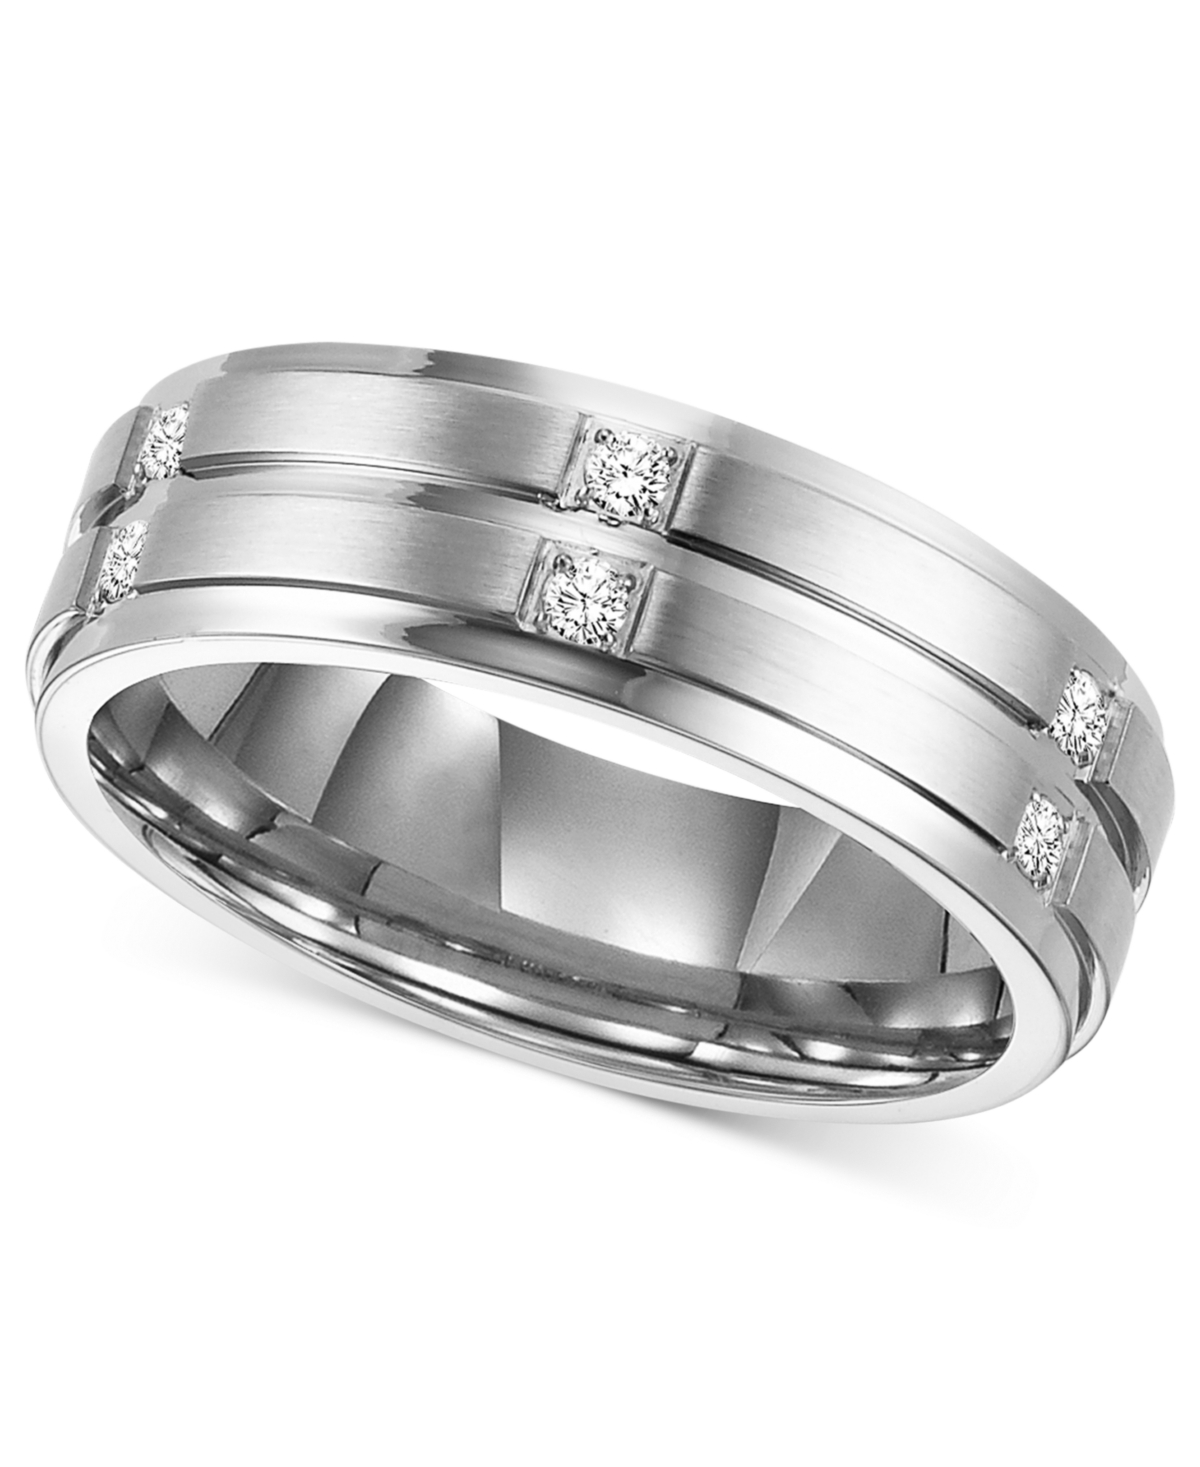 Men's Diamond Wedding Band Ring in Stainless Steel (1/6 ct. t.w.) - Steel